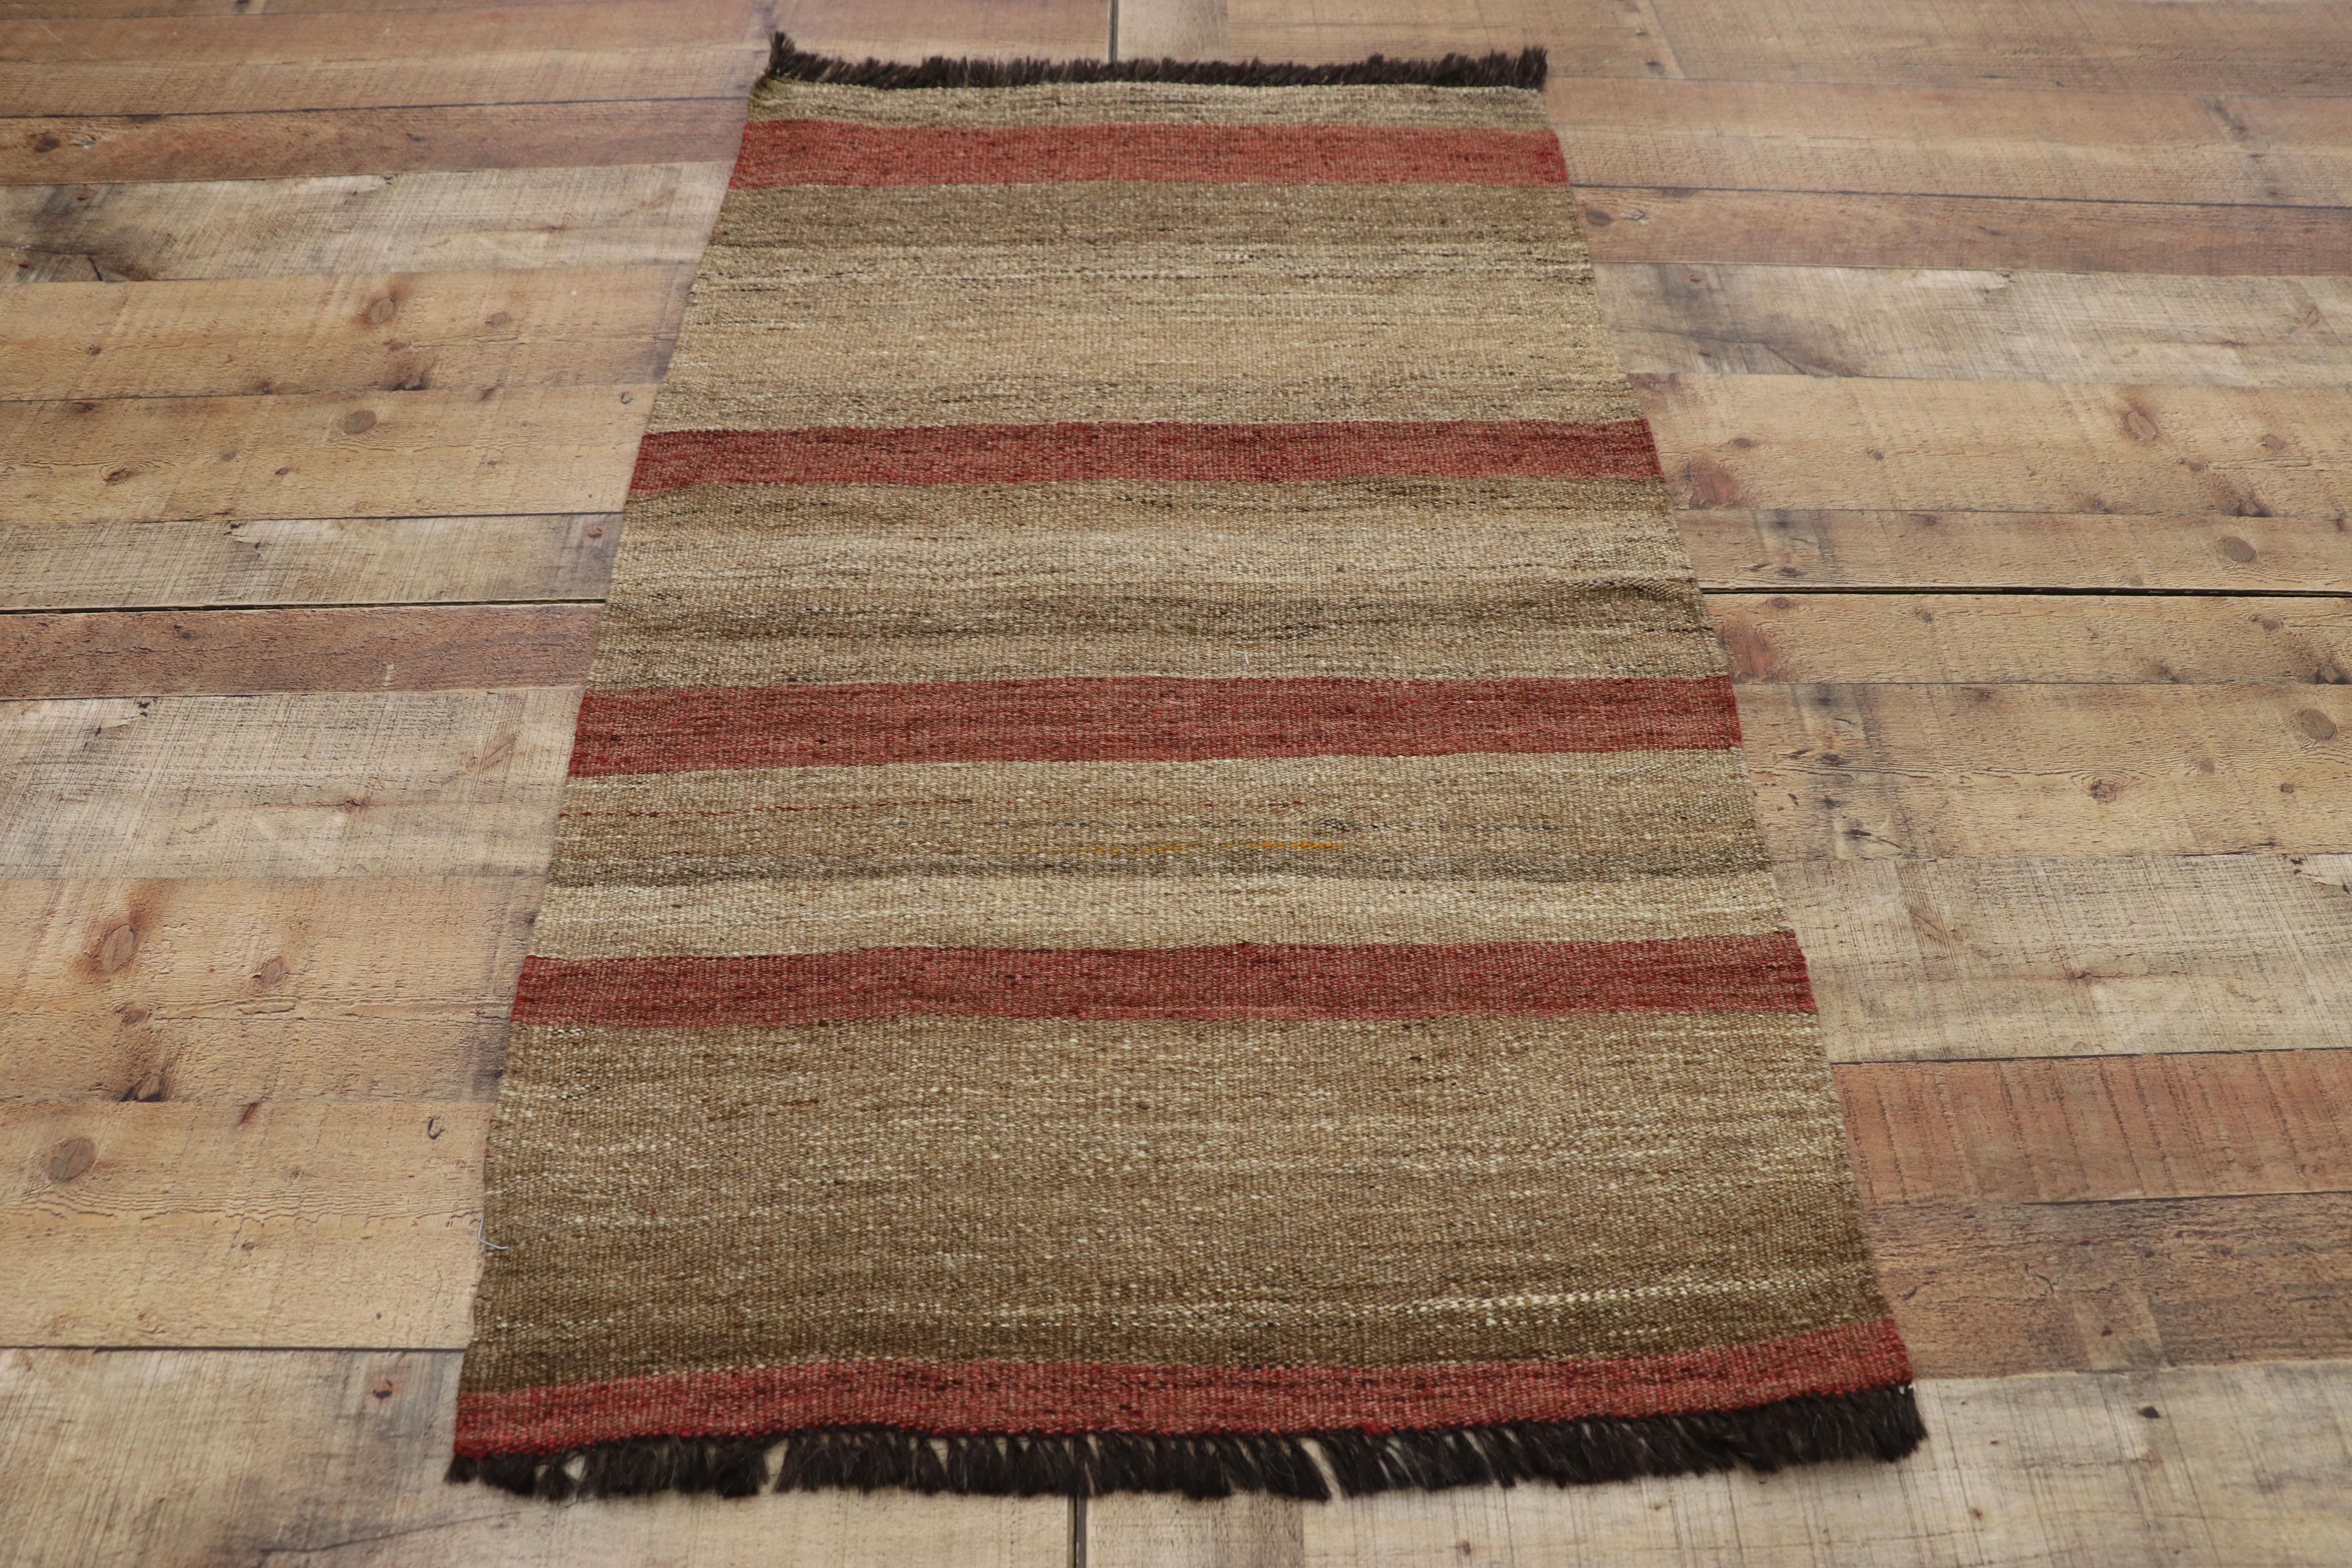 Vintage Turkish Kilim Accent Rug with Earth Tone Colors, Small Flat-Weave Rug 1